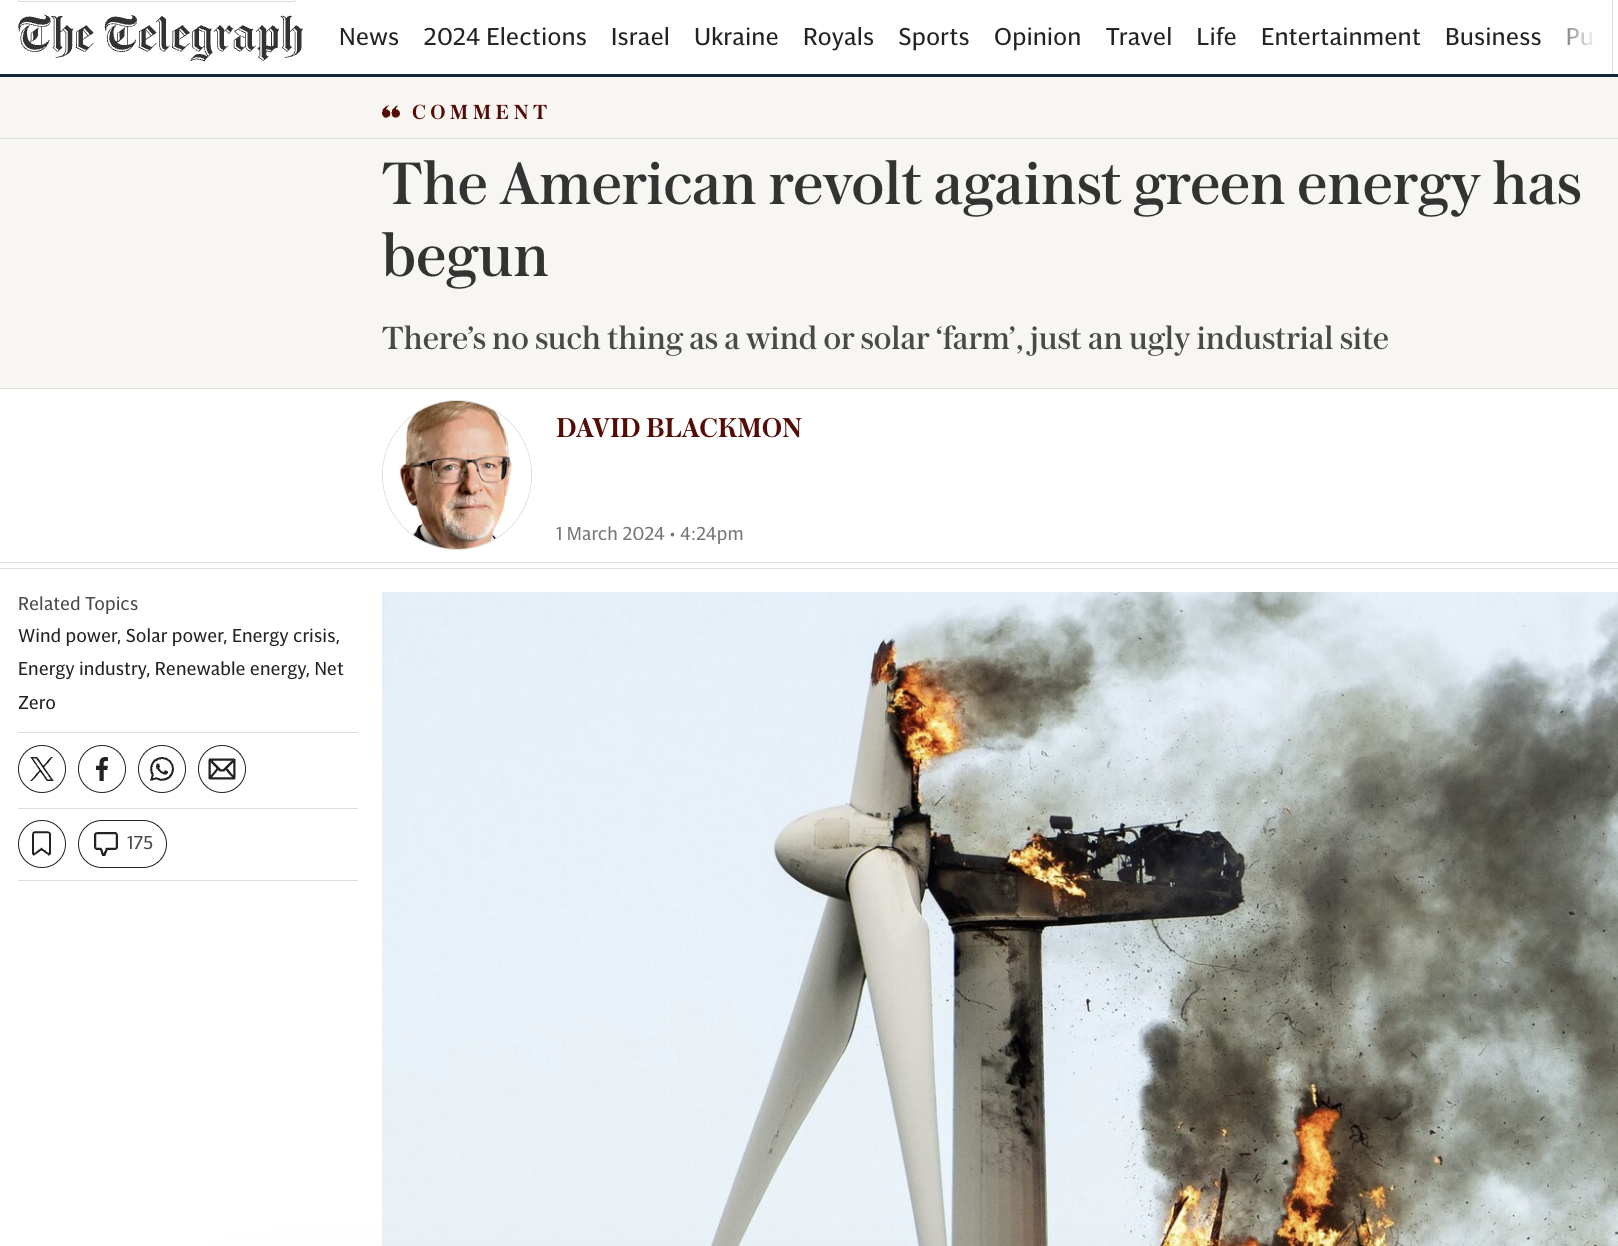 climatedepot.com - UK Telegraph: 'The American revolt against green energy has begun' - There's no such thing as a wind or solar 'farm', just an ugly industrial site